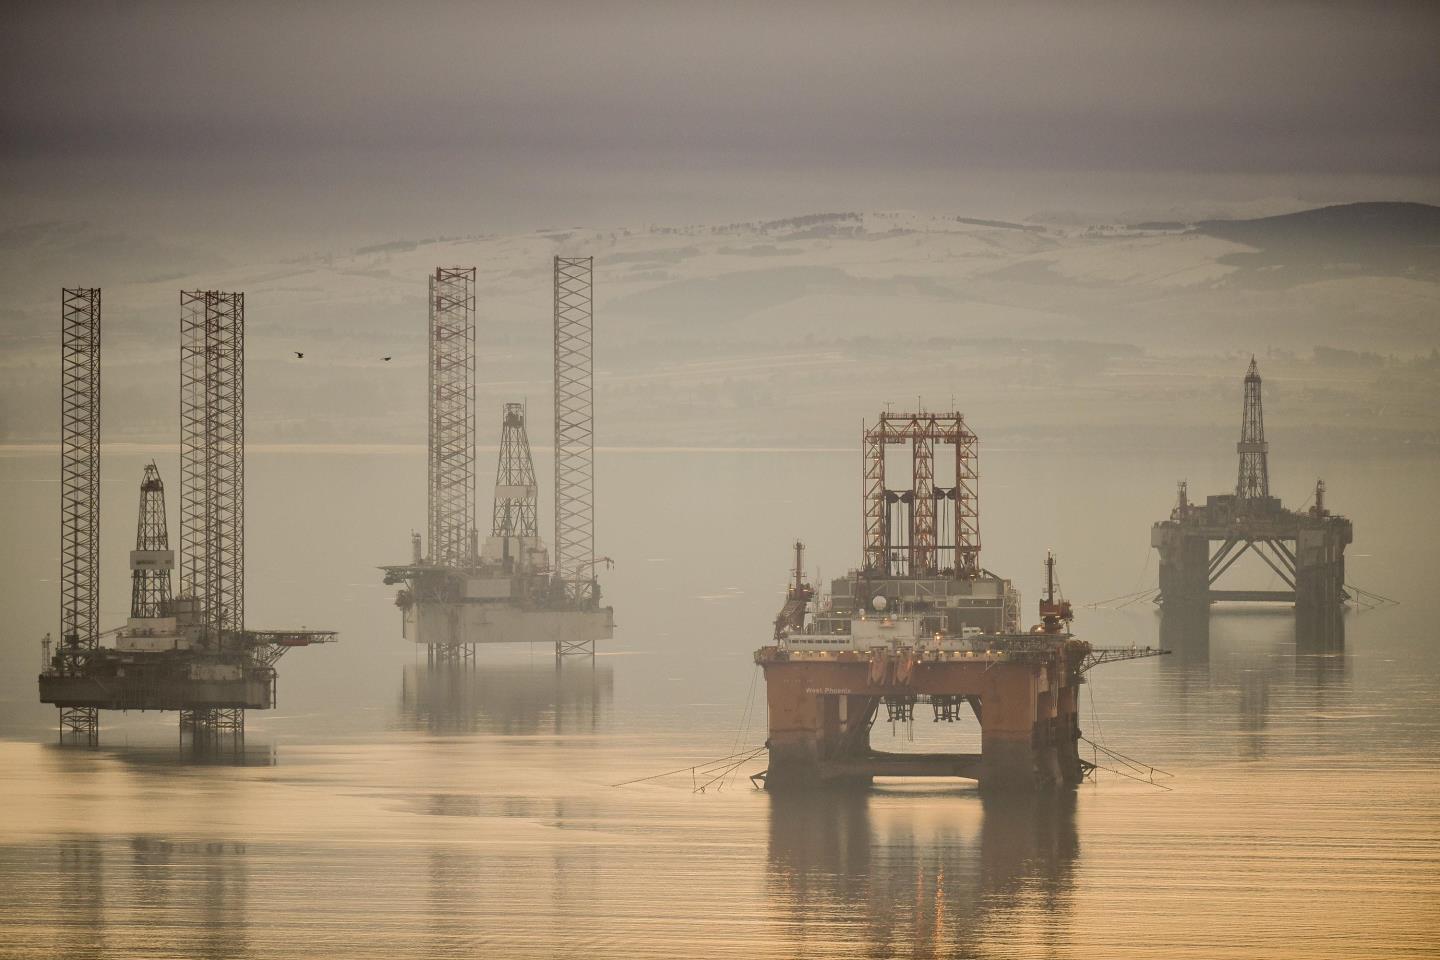 Port of Cromarty Firth gets 750th rig visit from Well-Safe Defender